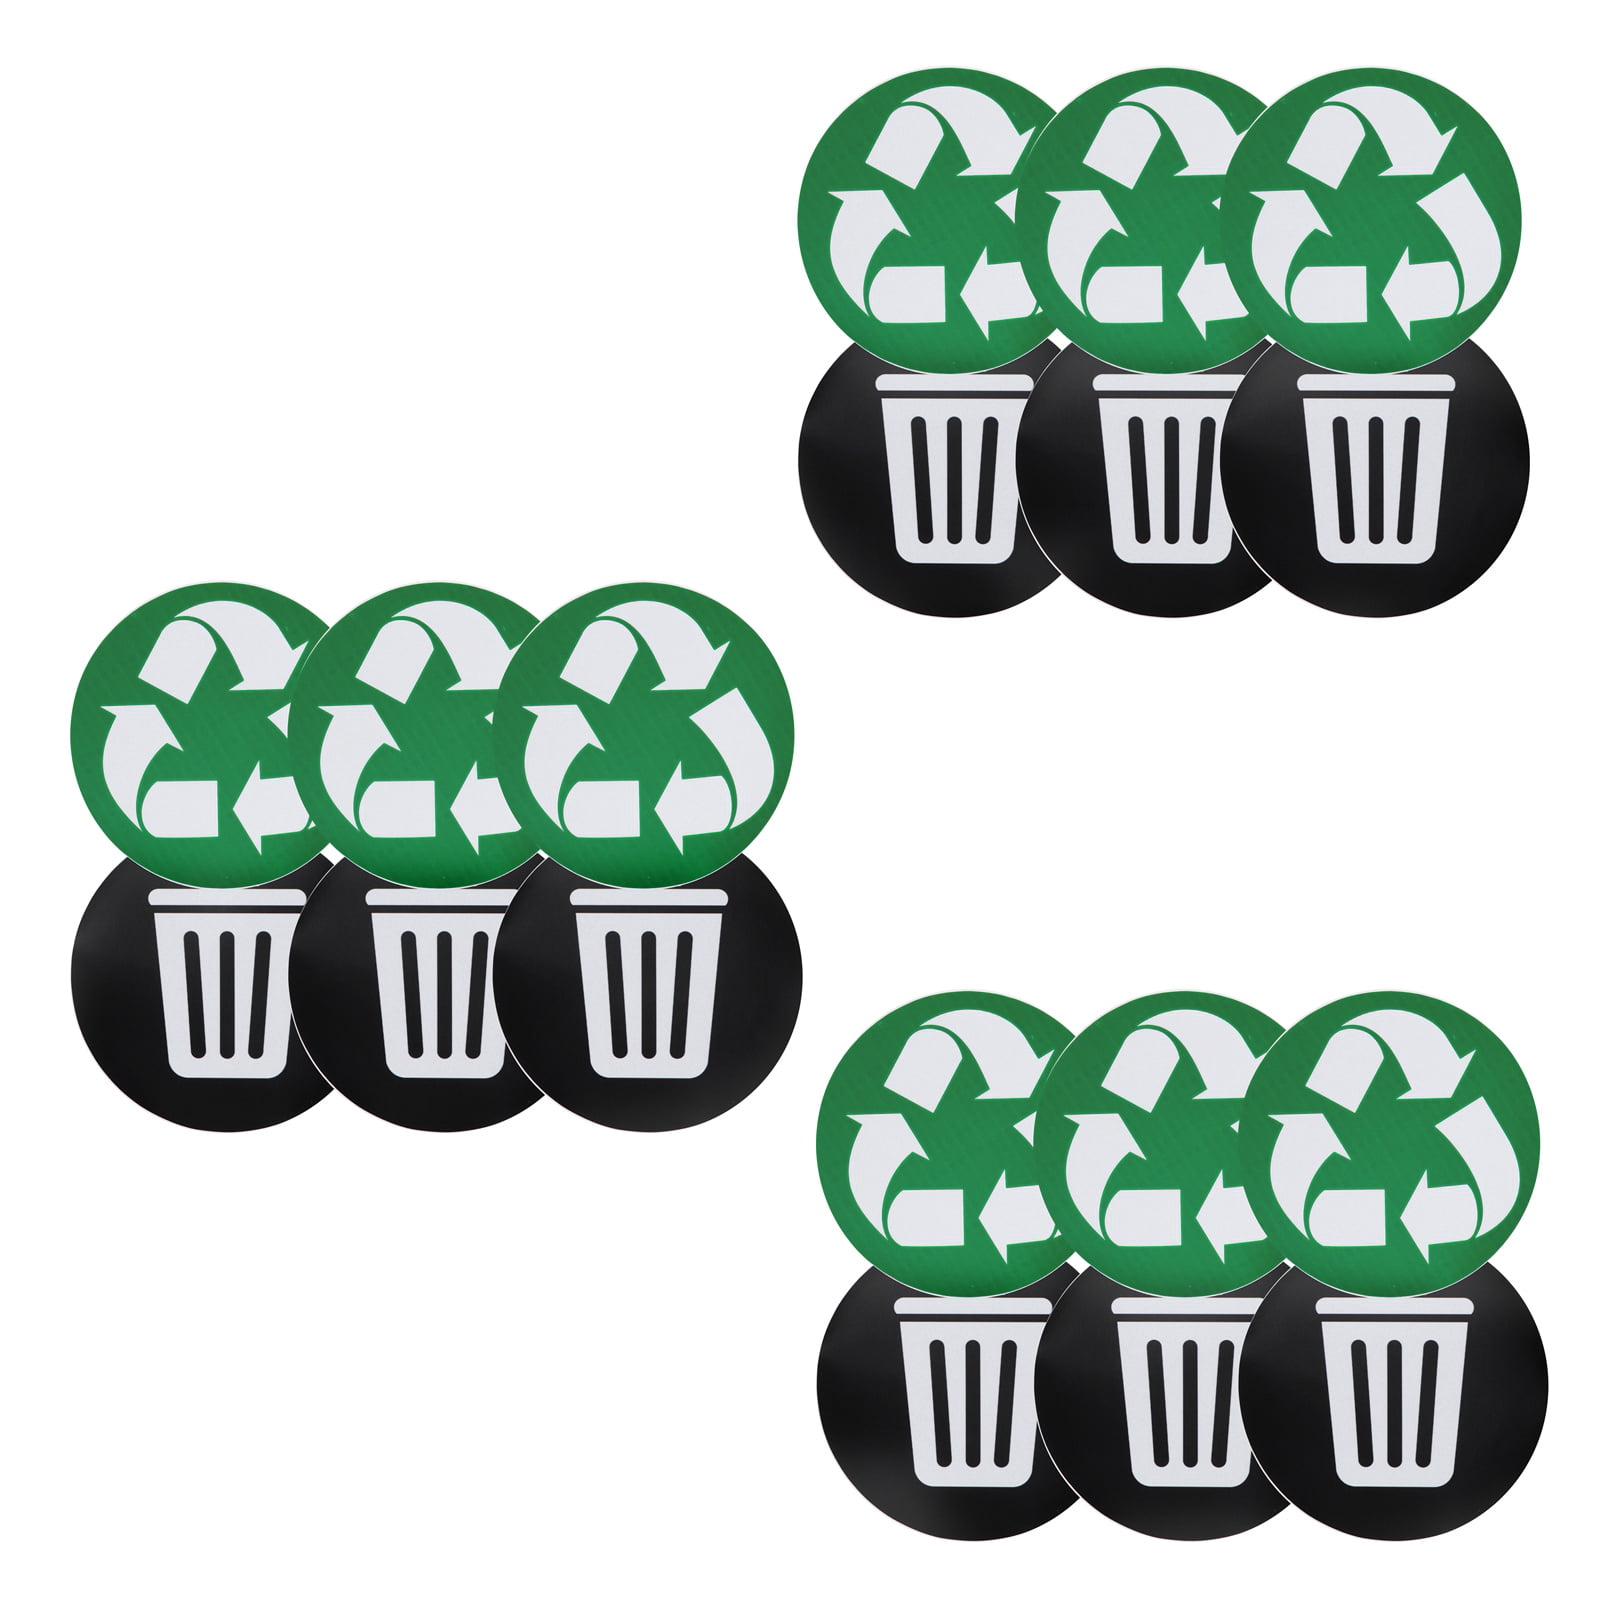 4.9in Round Waterproof Self Adhesive Recycle Trash Sticker Decal Organize Trash Cans for Cans Garbage Containers Bins 18PCS /Set Recycle Label Recycle Sticker 